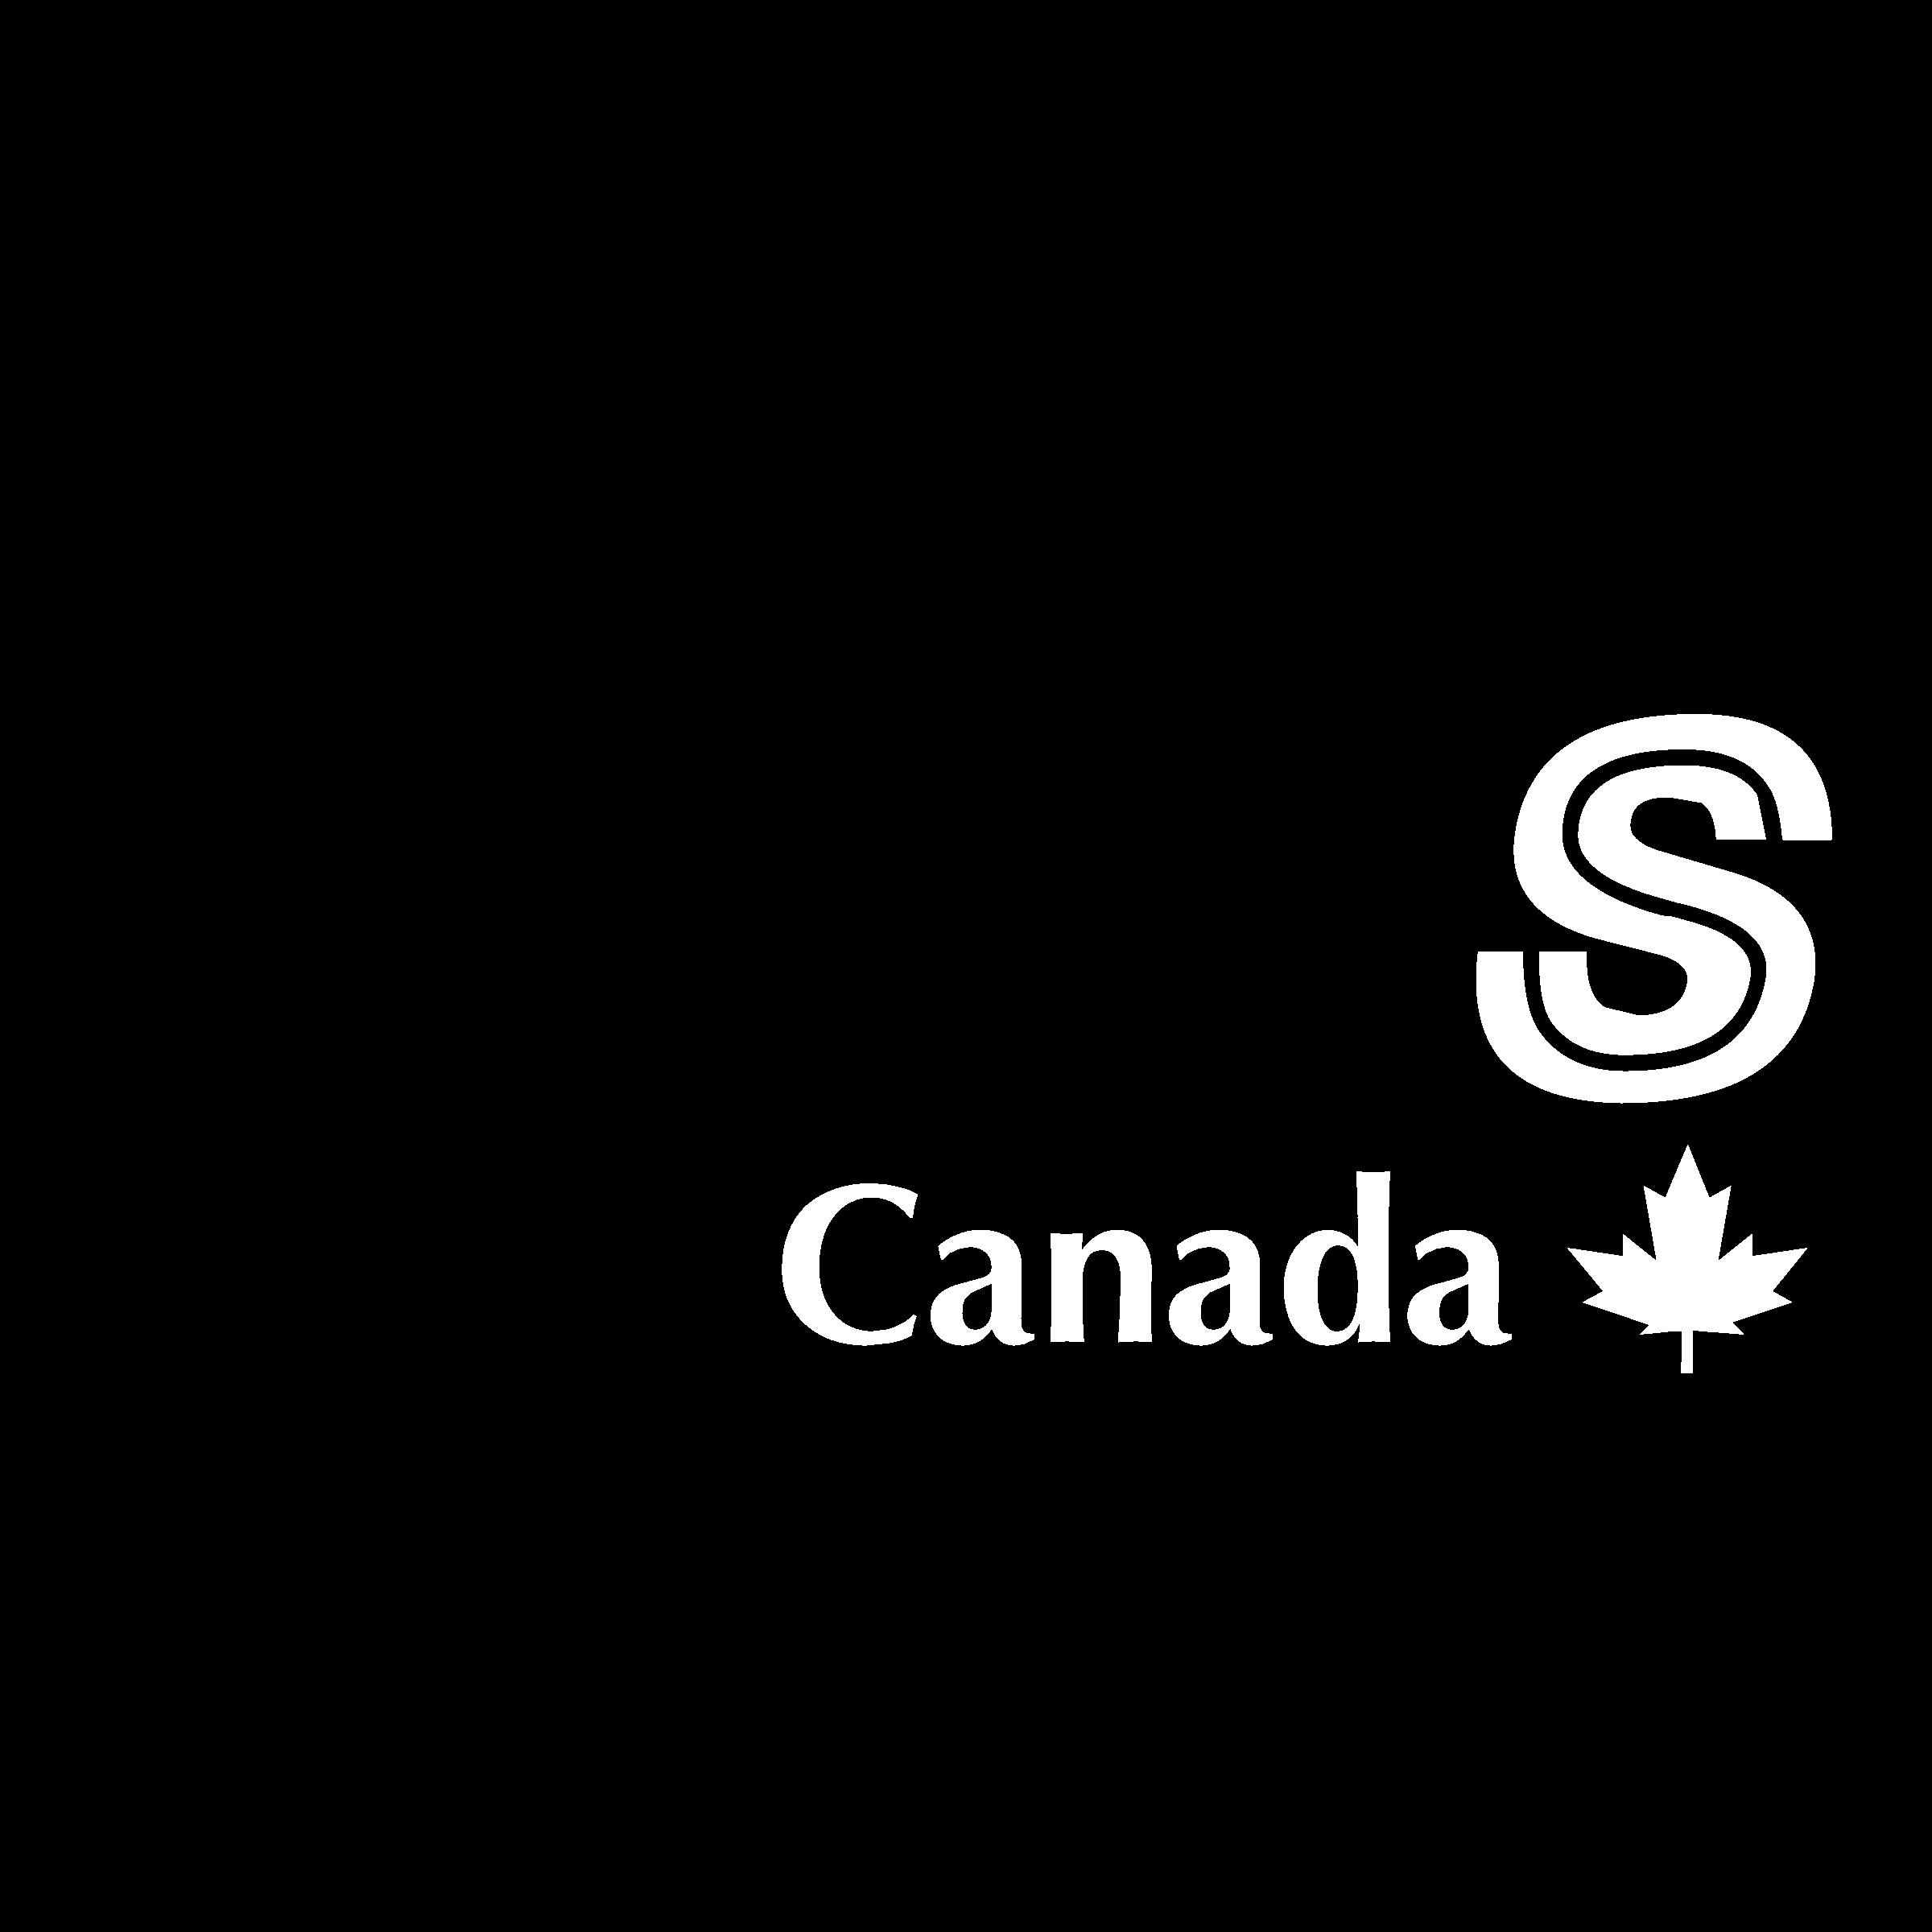 Sears White Logo - Sears Canada Logo PNG Transparent & SVG Vector